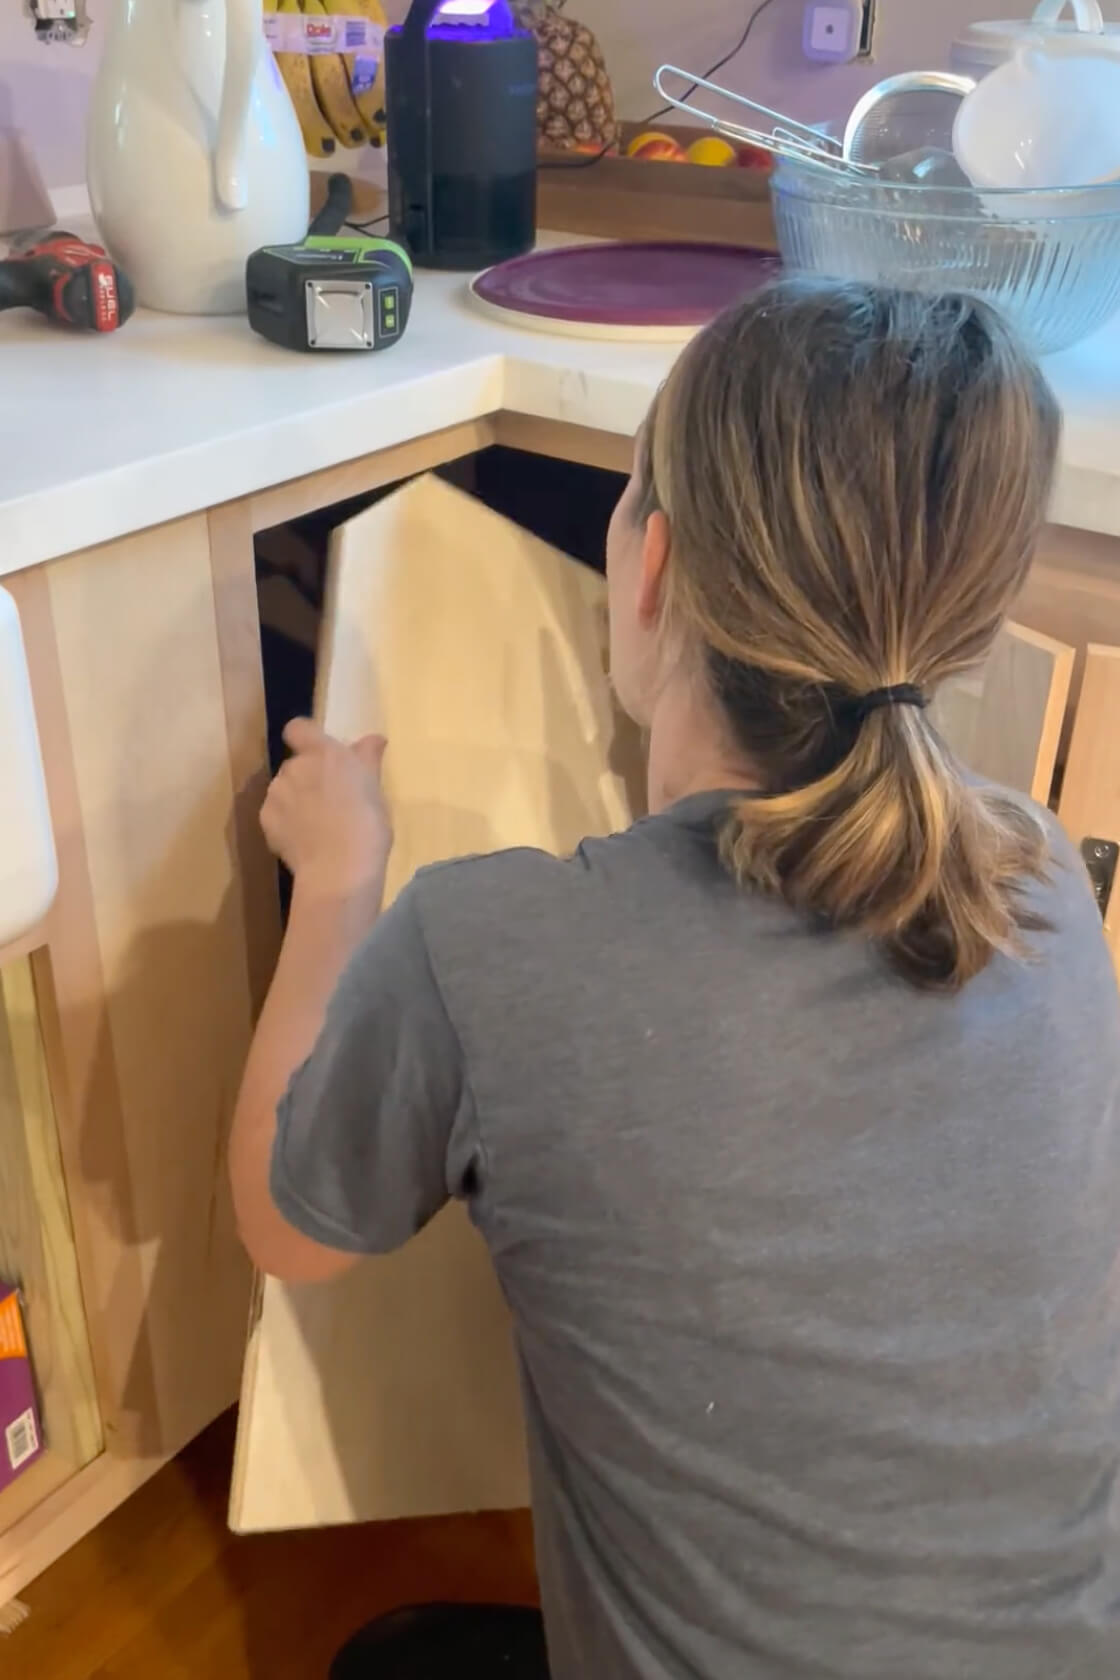 Fitting a shelf into a DIY kitchen cabinet.